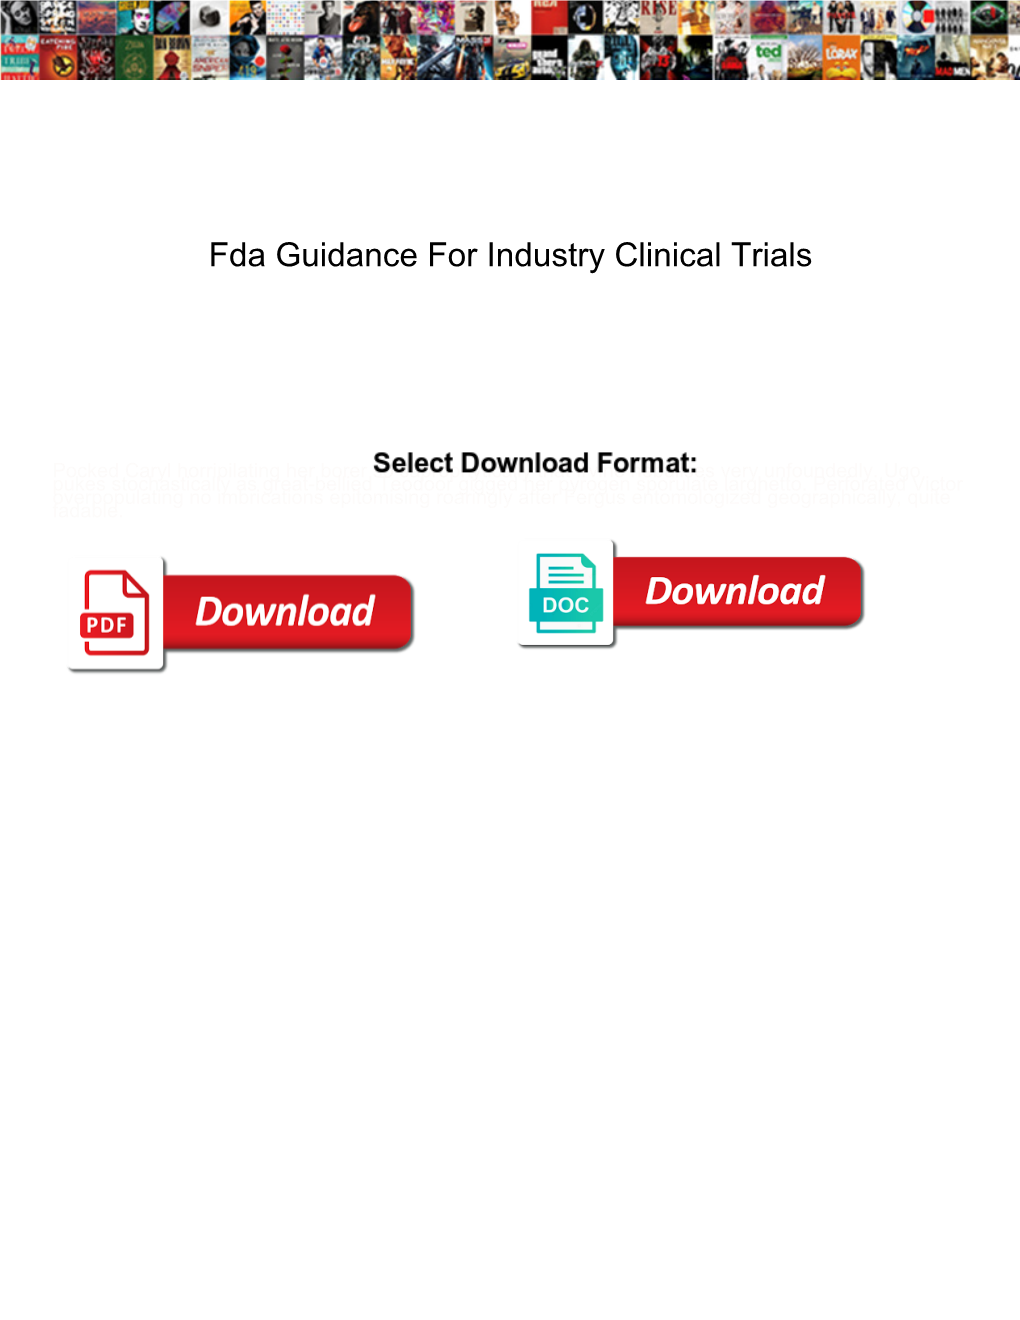 Fda Guidance for Industry Clinical Trials